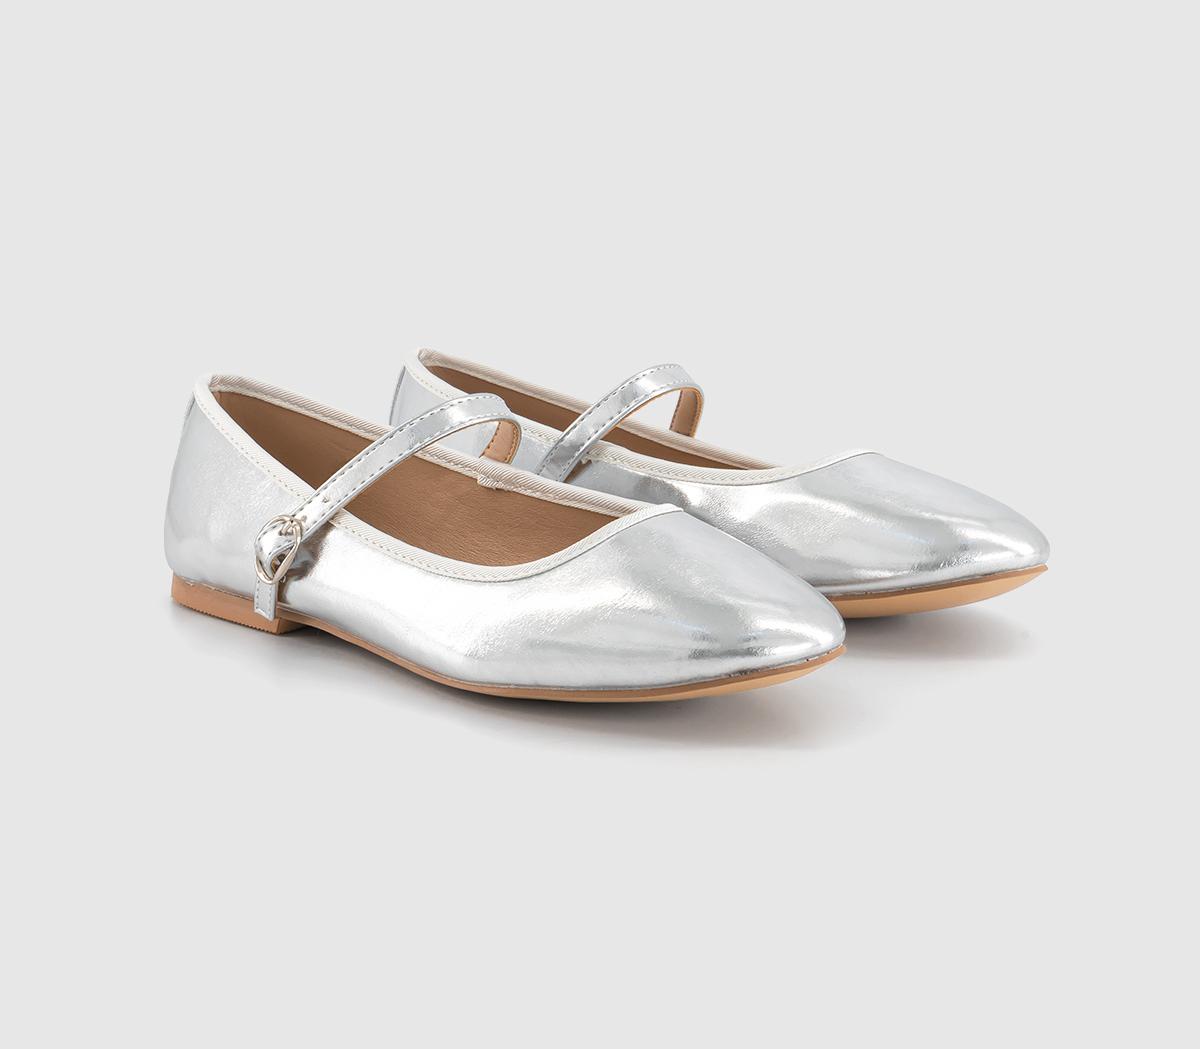 OFFICE Womens Flower Mary Jane Ballerina Shoes Silver, 3